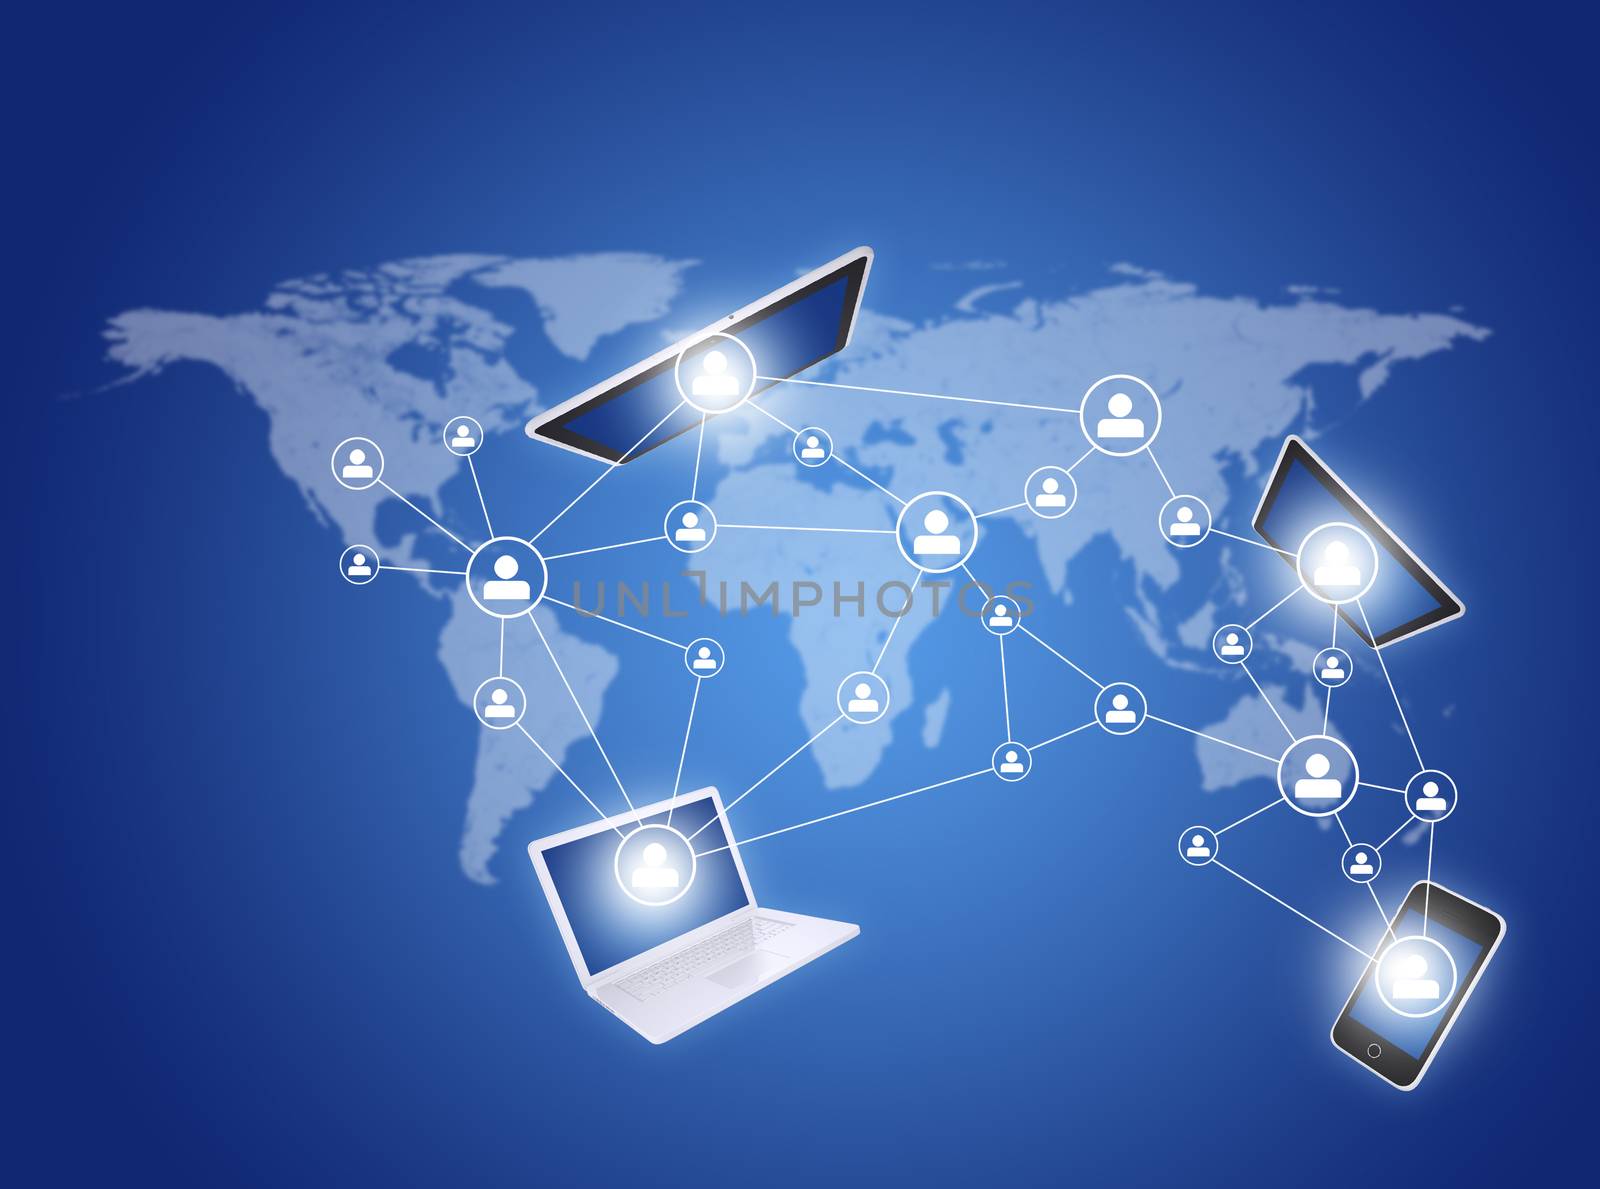 Modern communication technology illustration with social icons and devices on world map